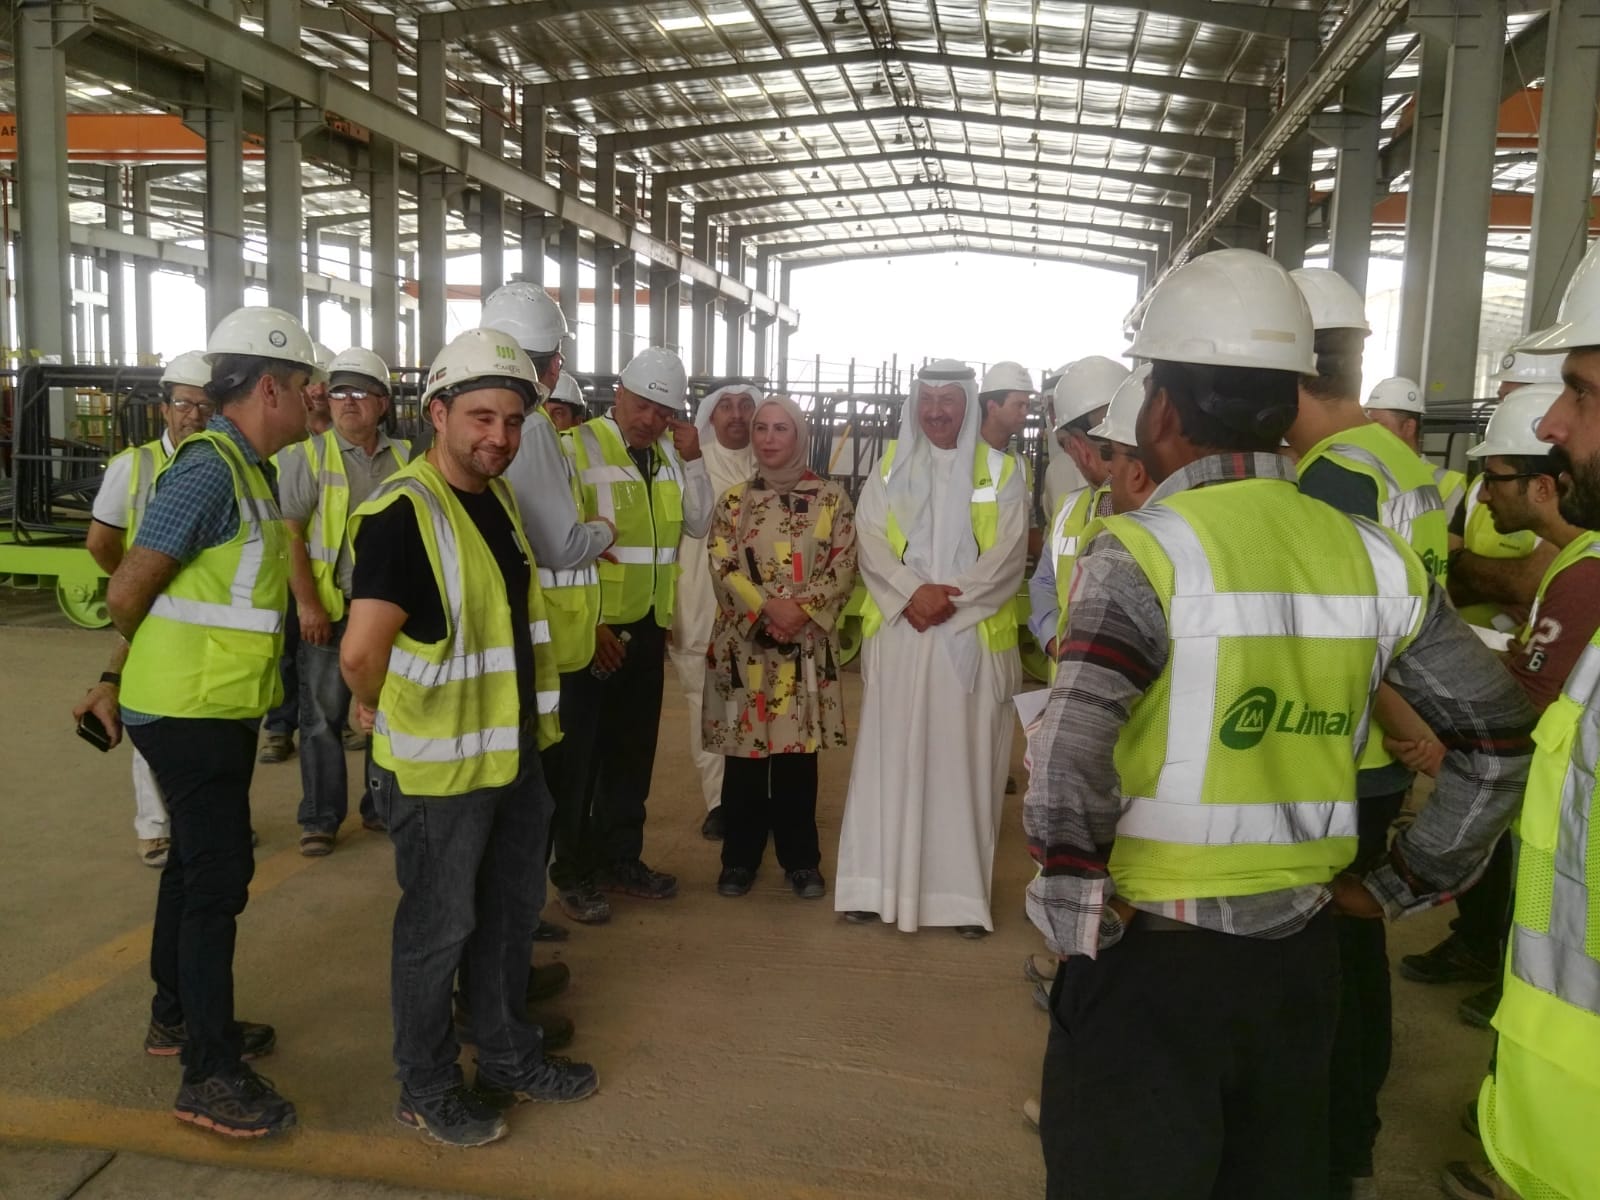 Minister of Public Works and Minister of State for Municipal Affairs Hussam Al-Roumi visits The new passenger terminal (T2) at Kuwait International Airport